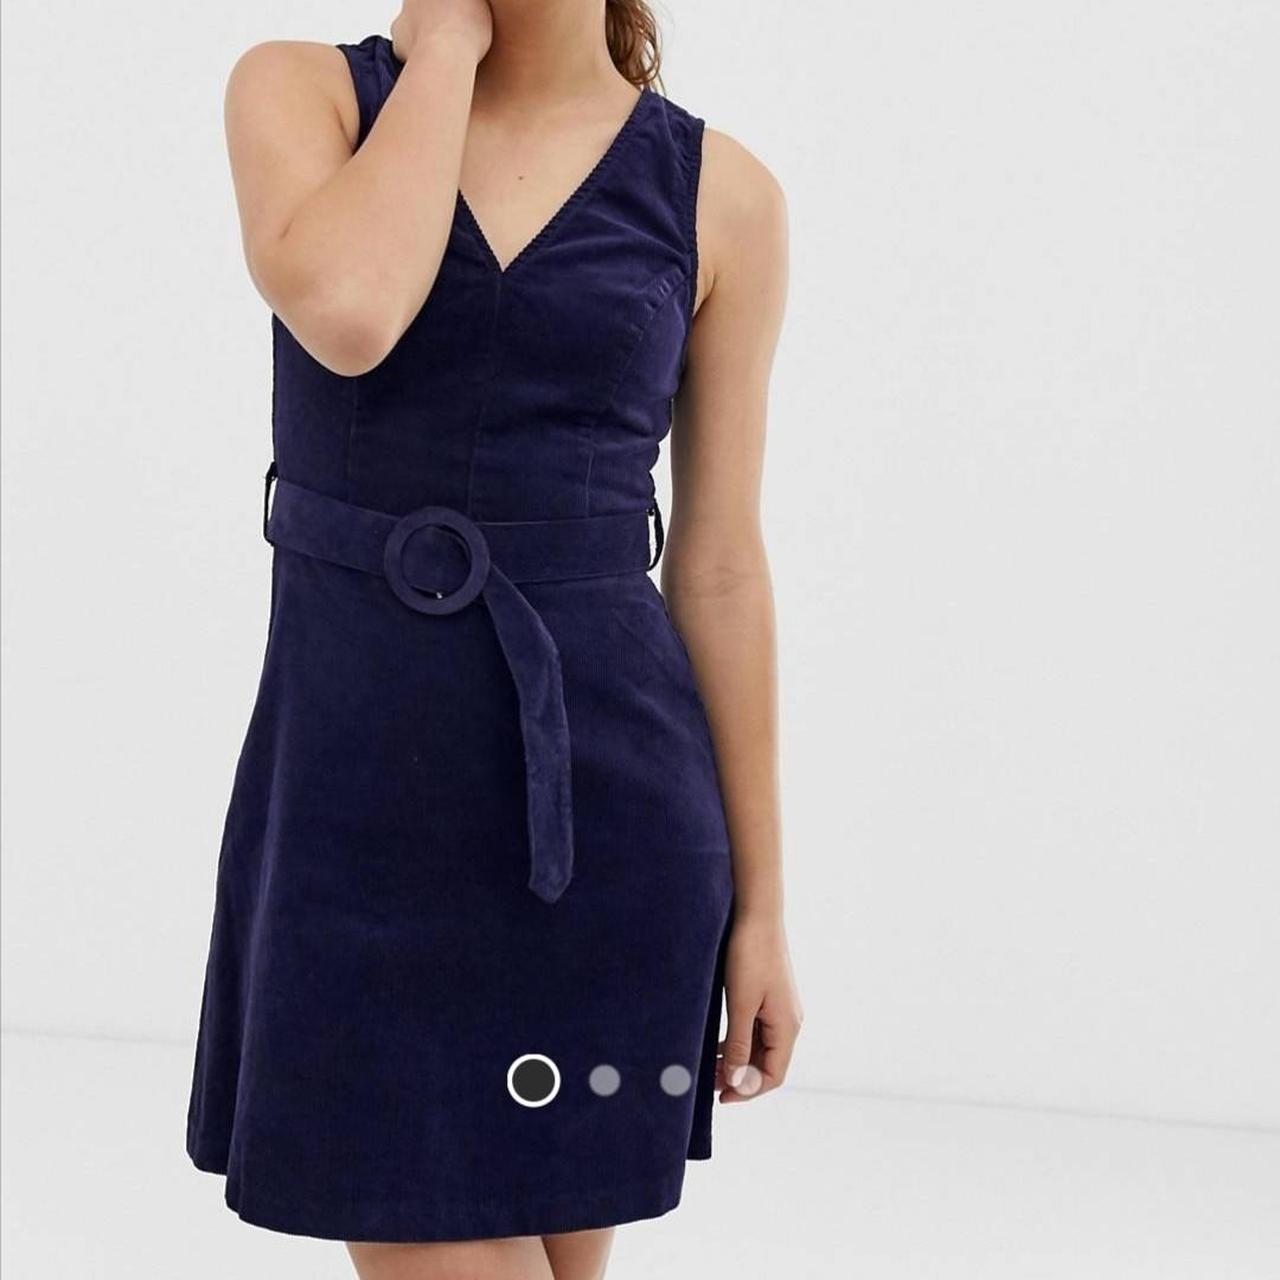 New Look Women's Blue and Navy Dress